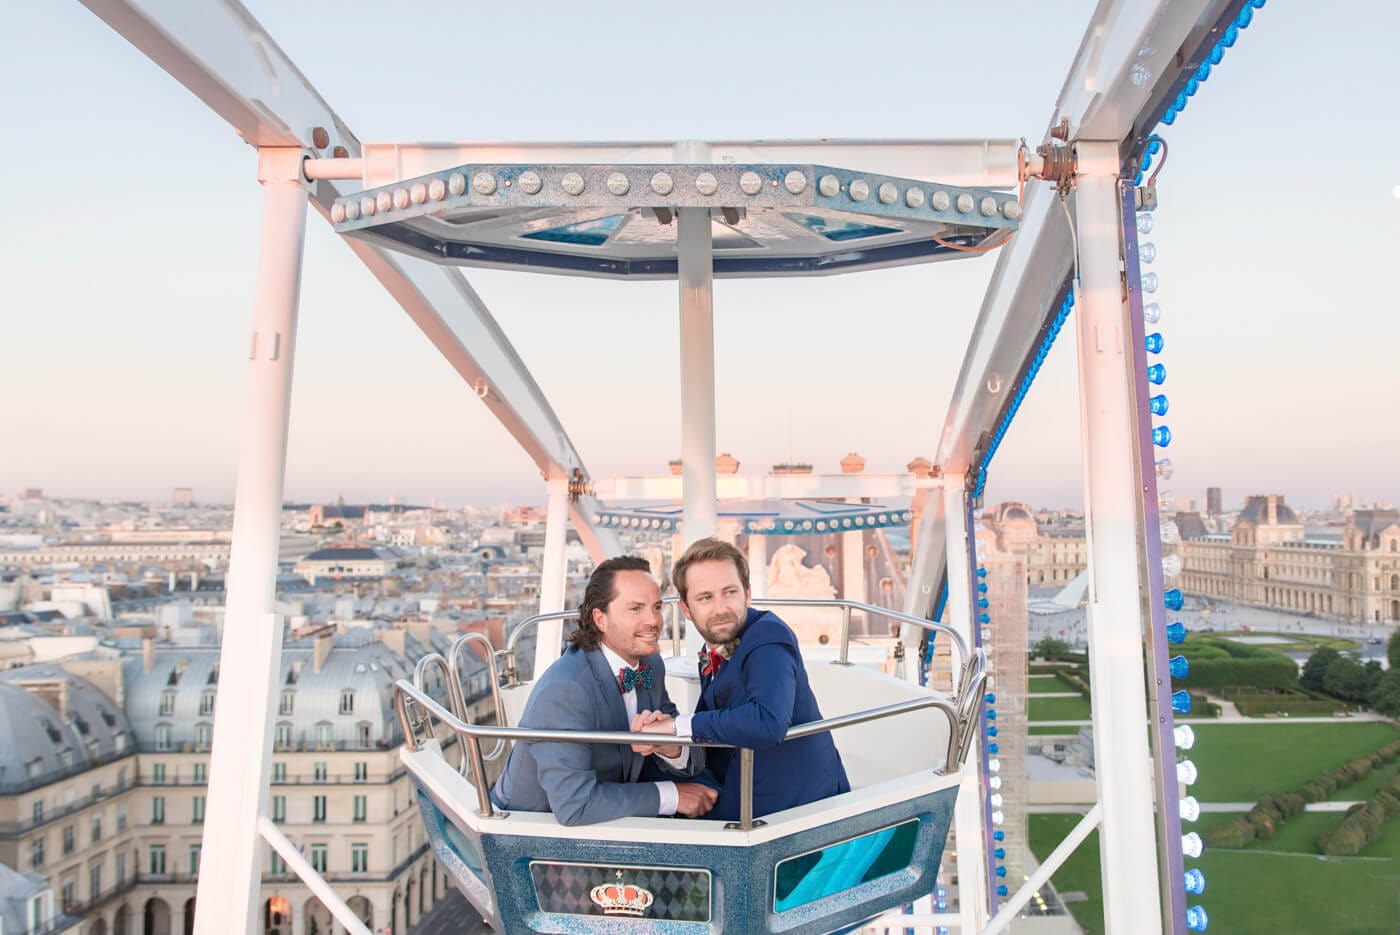 Romantic same-sex engagement photo session with the Parisian skyline backdrop. Photograph captured by famous NYC editorial photographer.